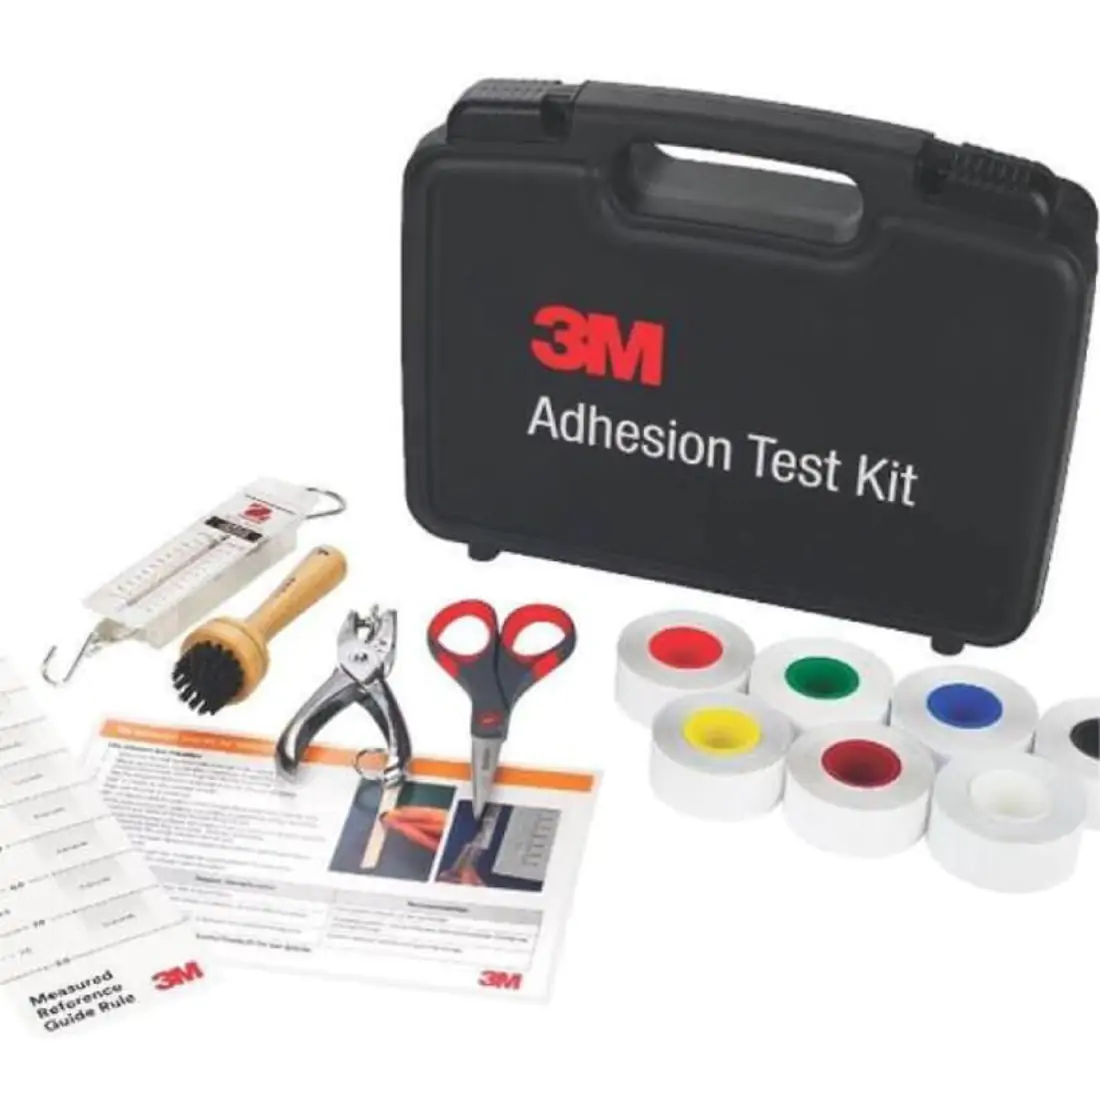 Black 3M Adhesion Test Kit with various application tools displayed, including a rivet brush, spring scale, tapes, scissors and reference guides.
